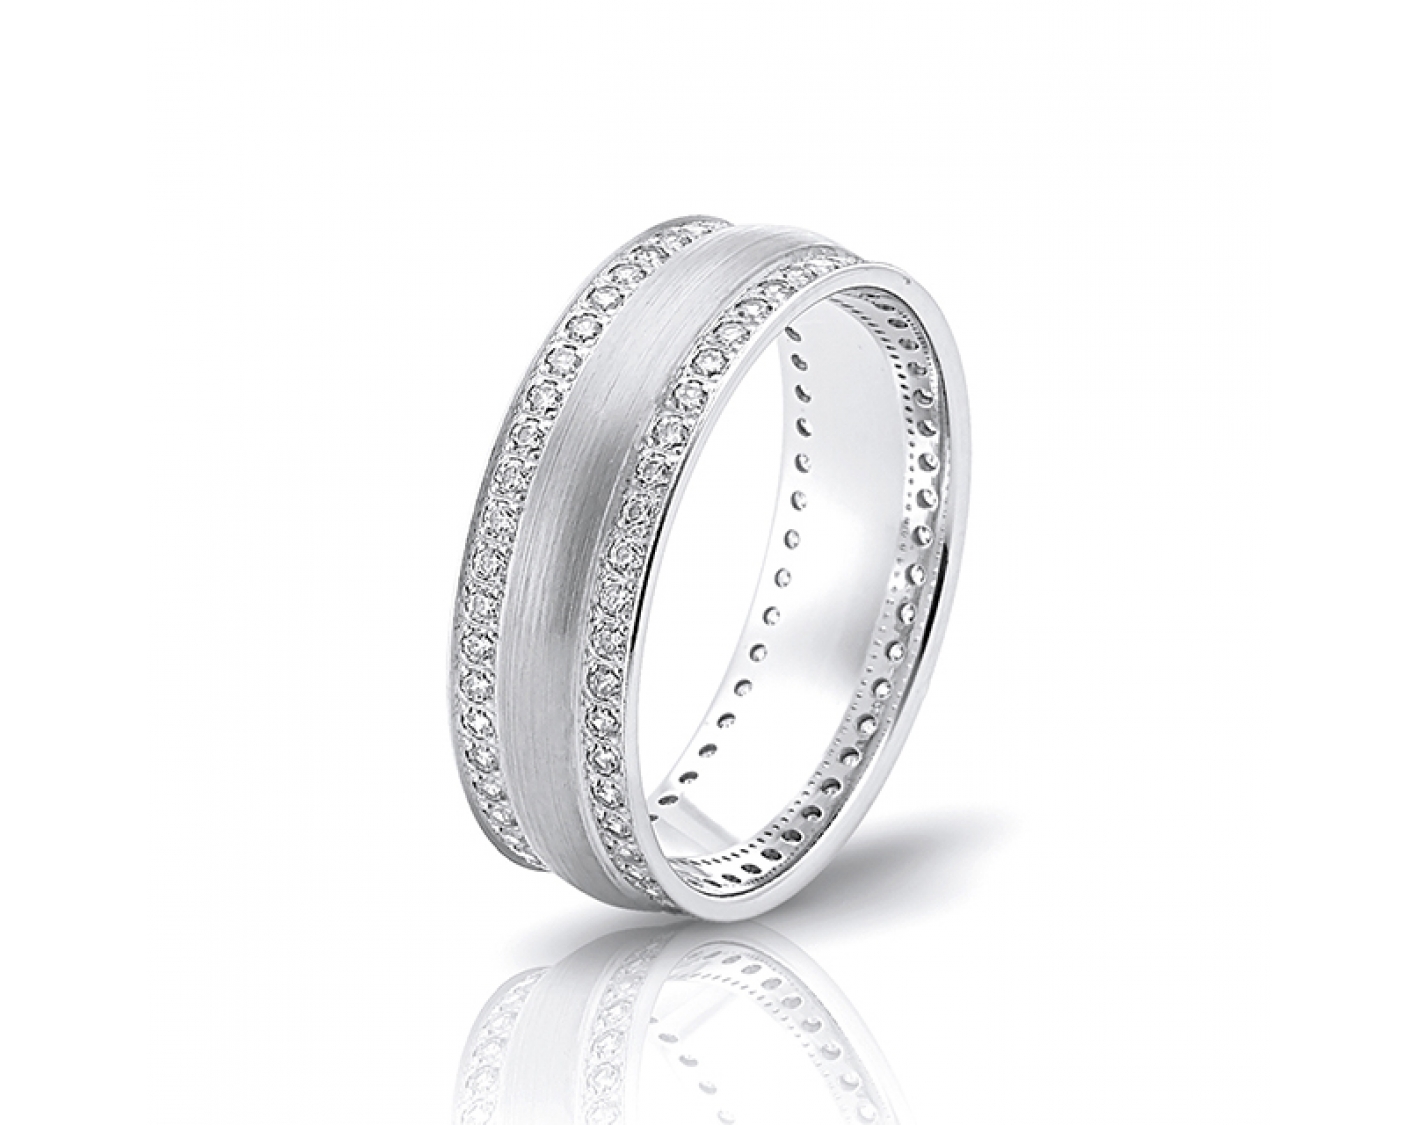 dual-tone 6mm two-toned* diamond full eternity wedding band with middle matte line Photos & images